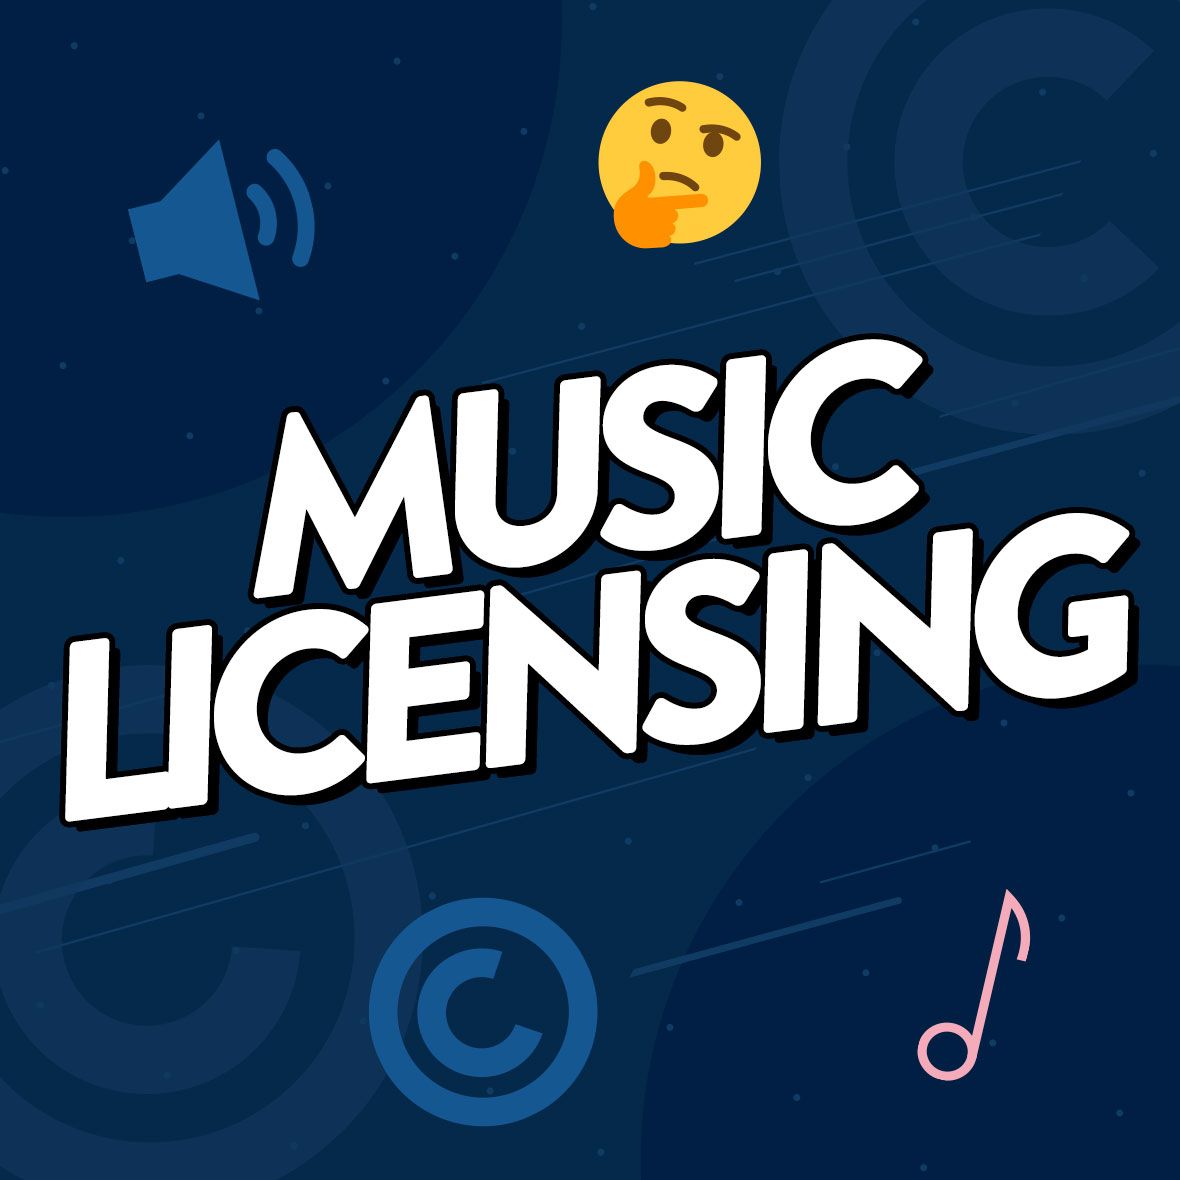 Imagery relating to music and copyright with the text 'Music Licensing' over the top.